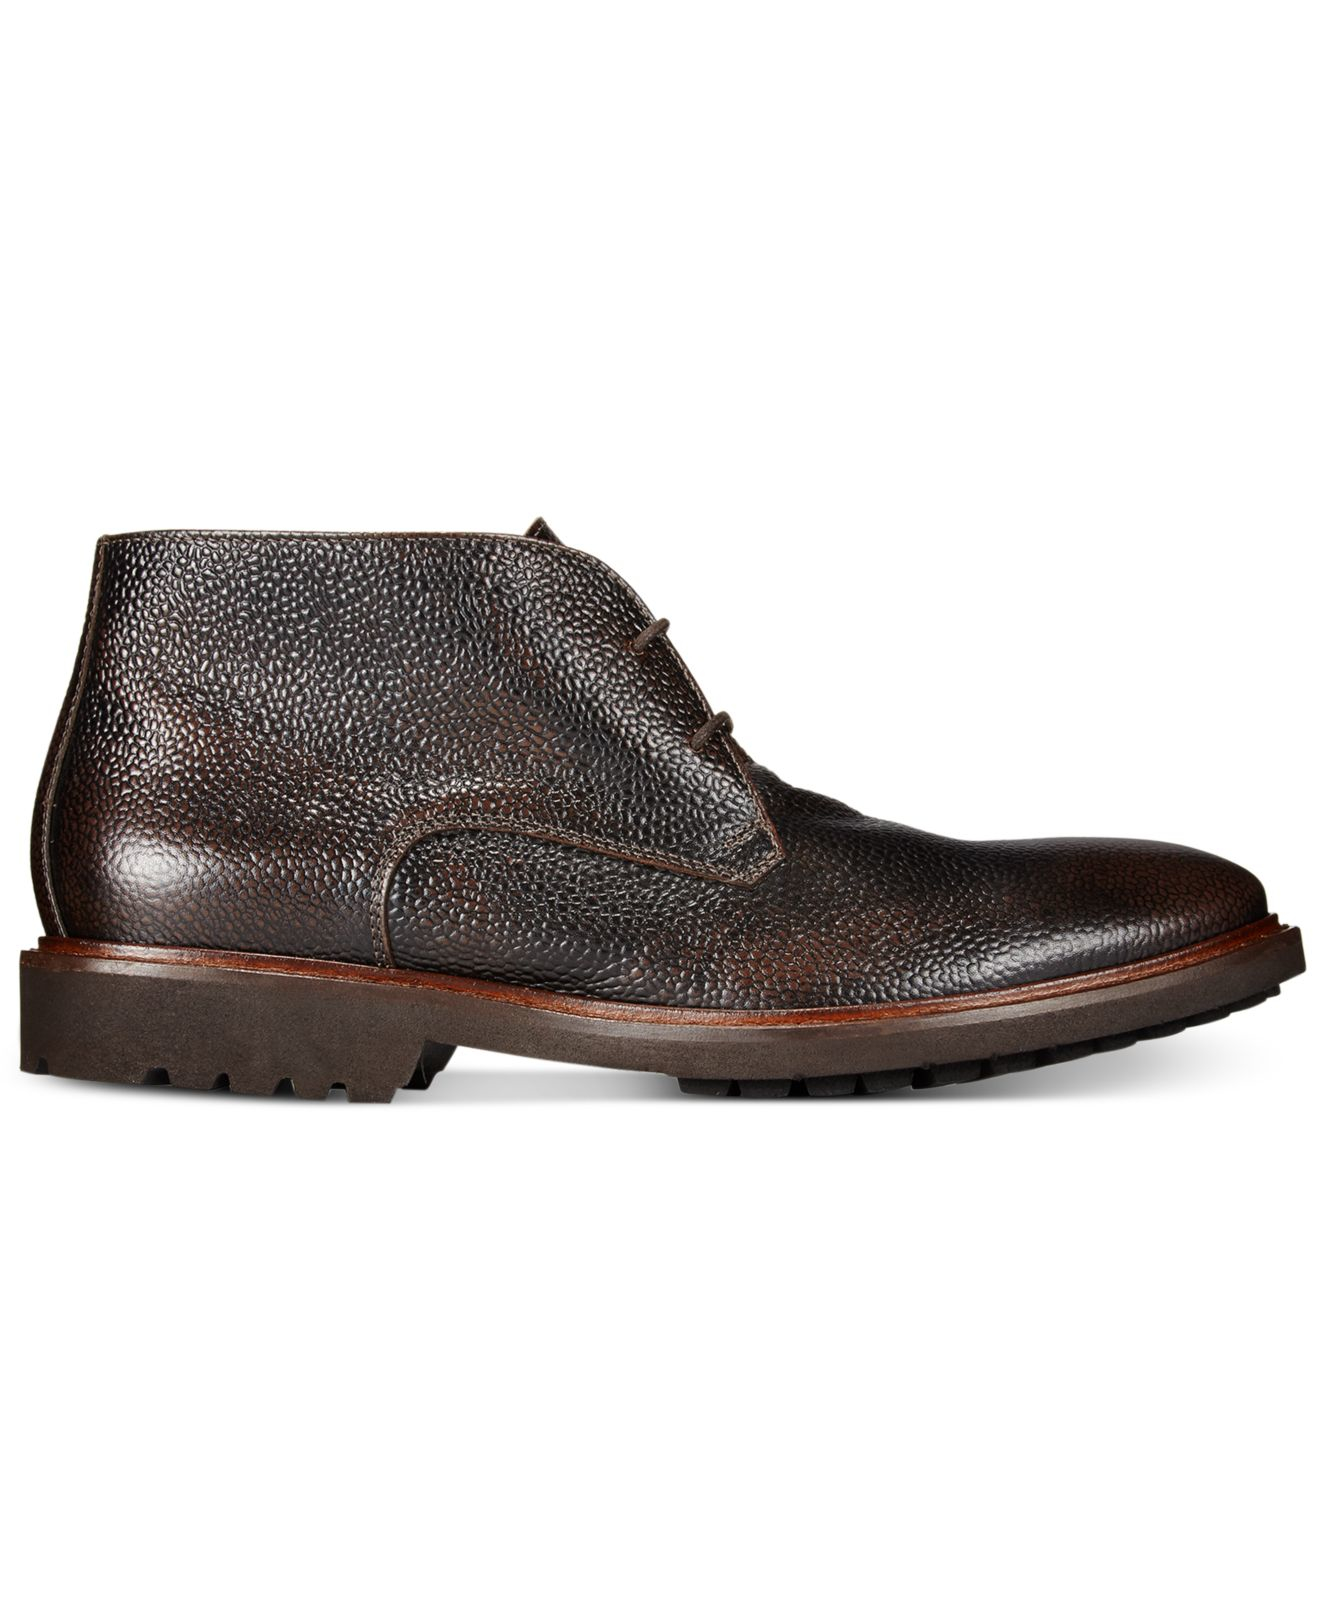 Lyst - Kenneth Cole Good Fella Chukka Boots in Brown for Men